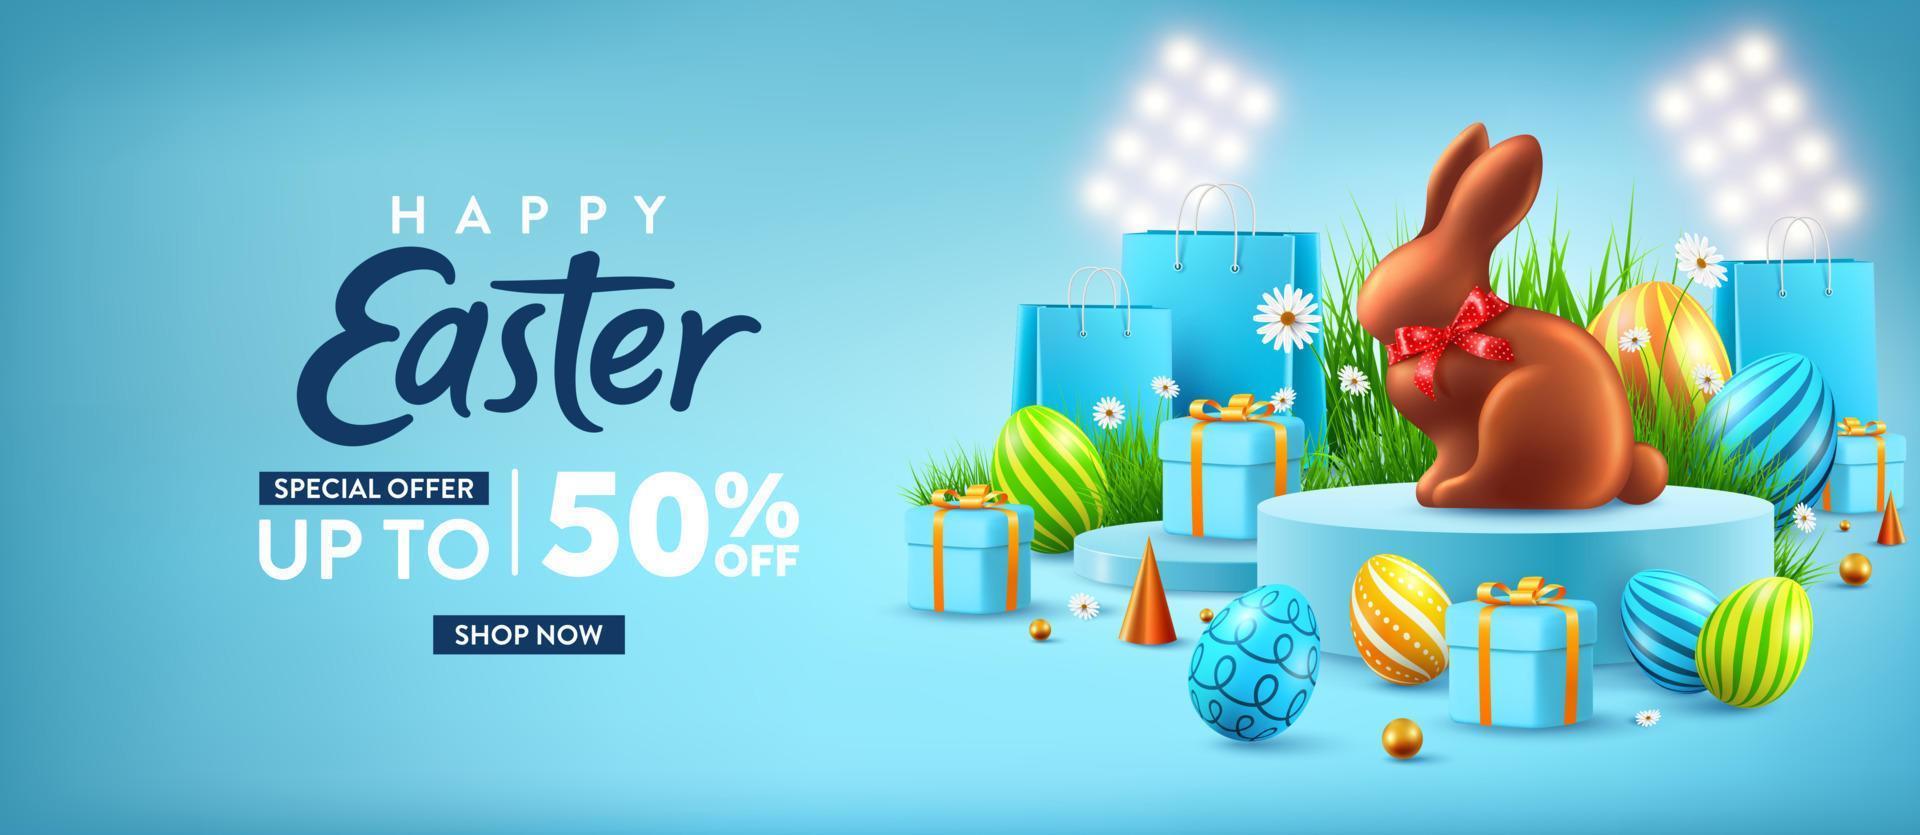 Easter Sale poster or banner template with Easter Bunny over on product podium scene. Greetings and presents for Easter Day.Promotion and shopping template for Easter vector